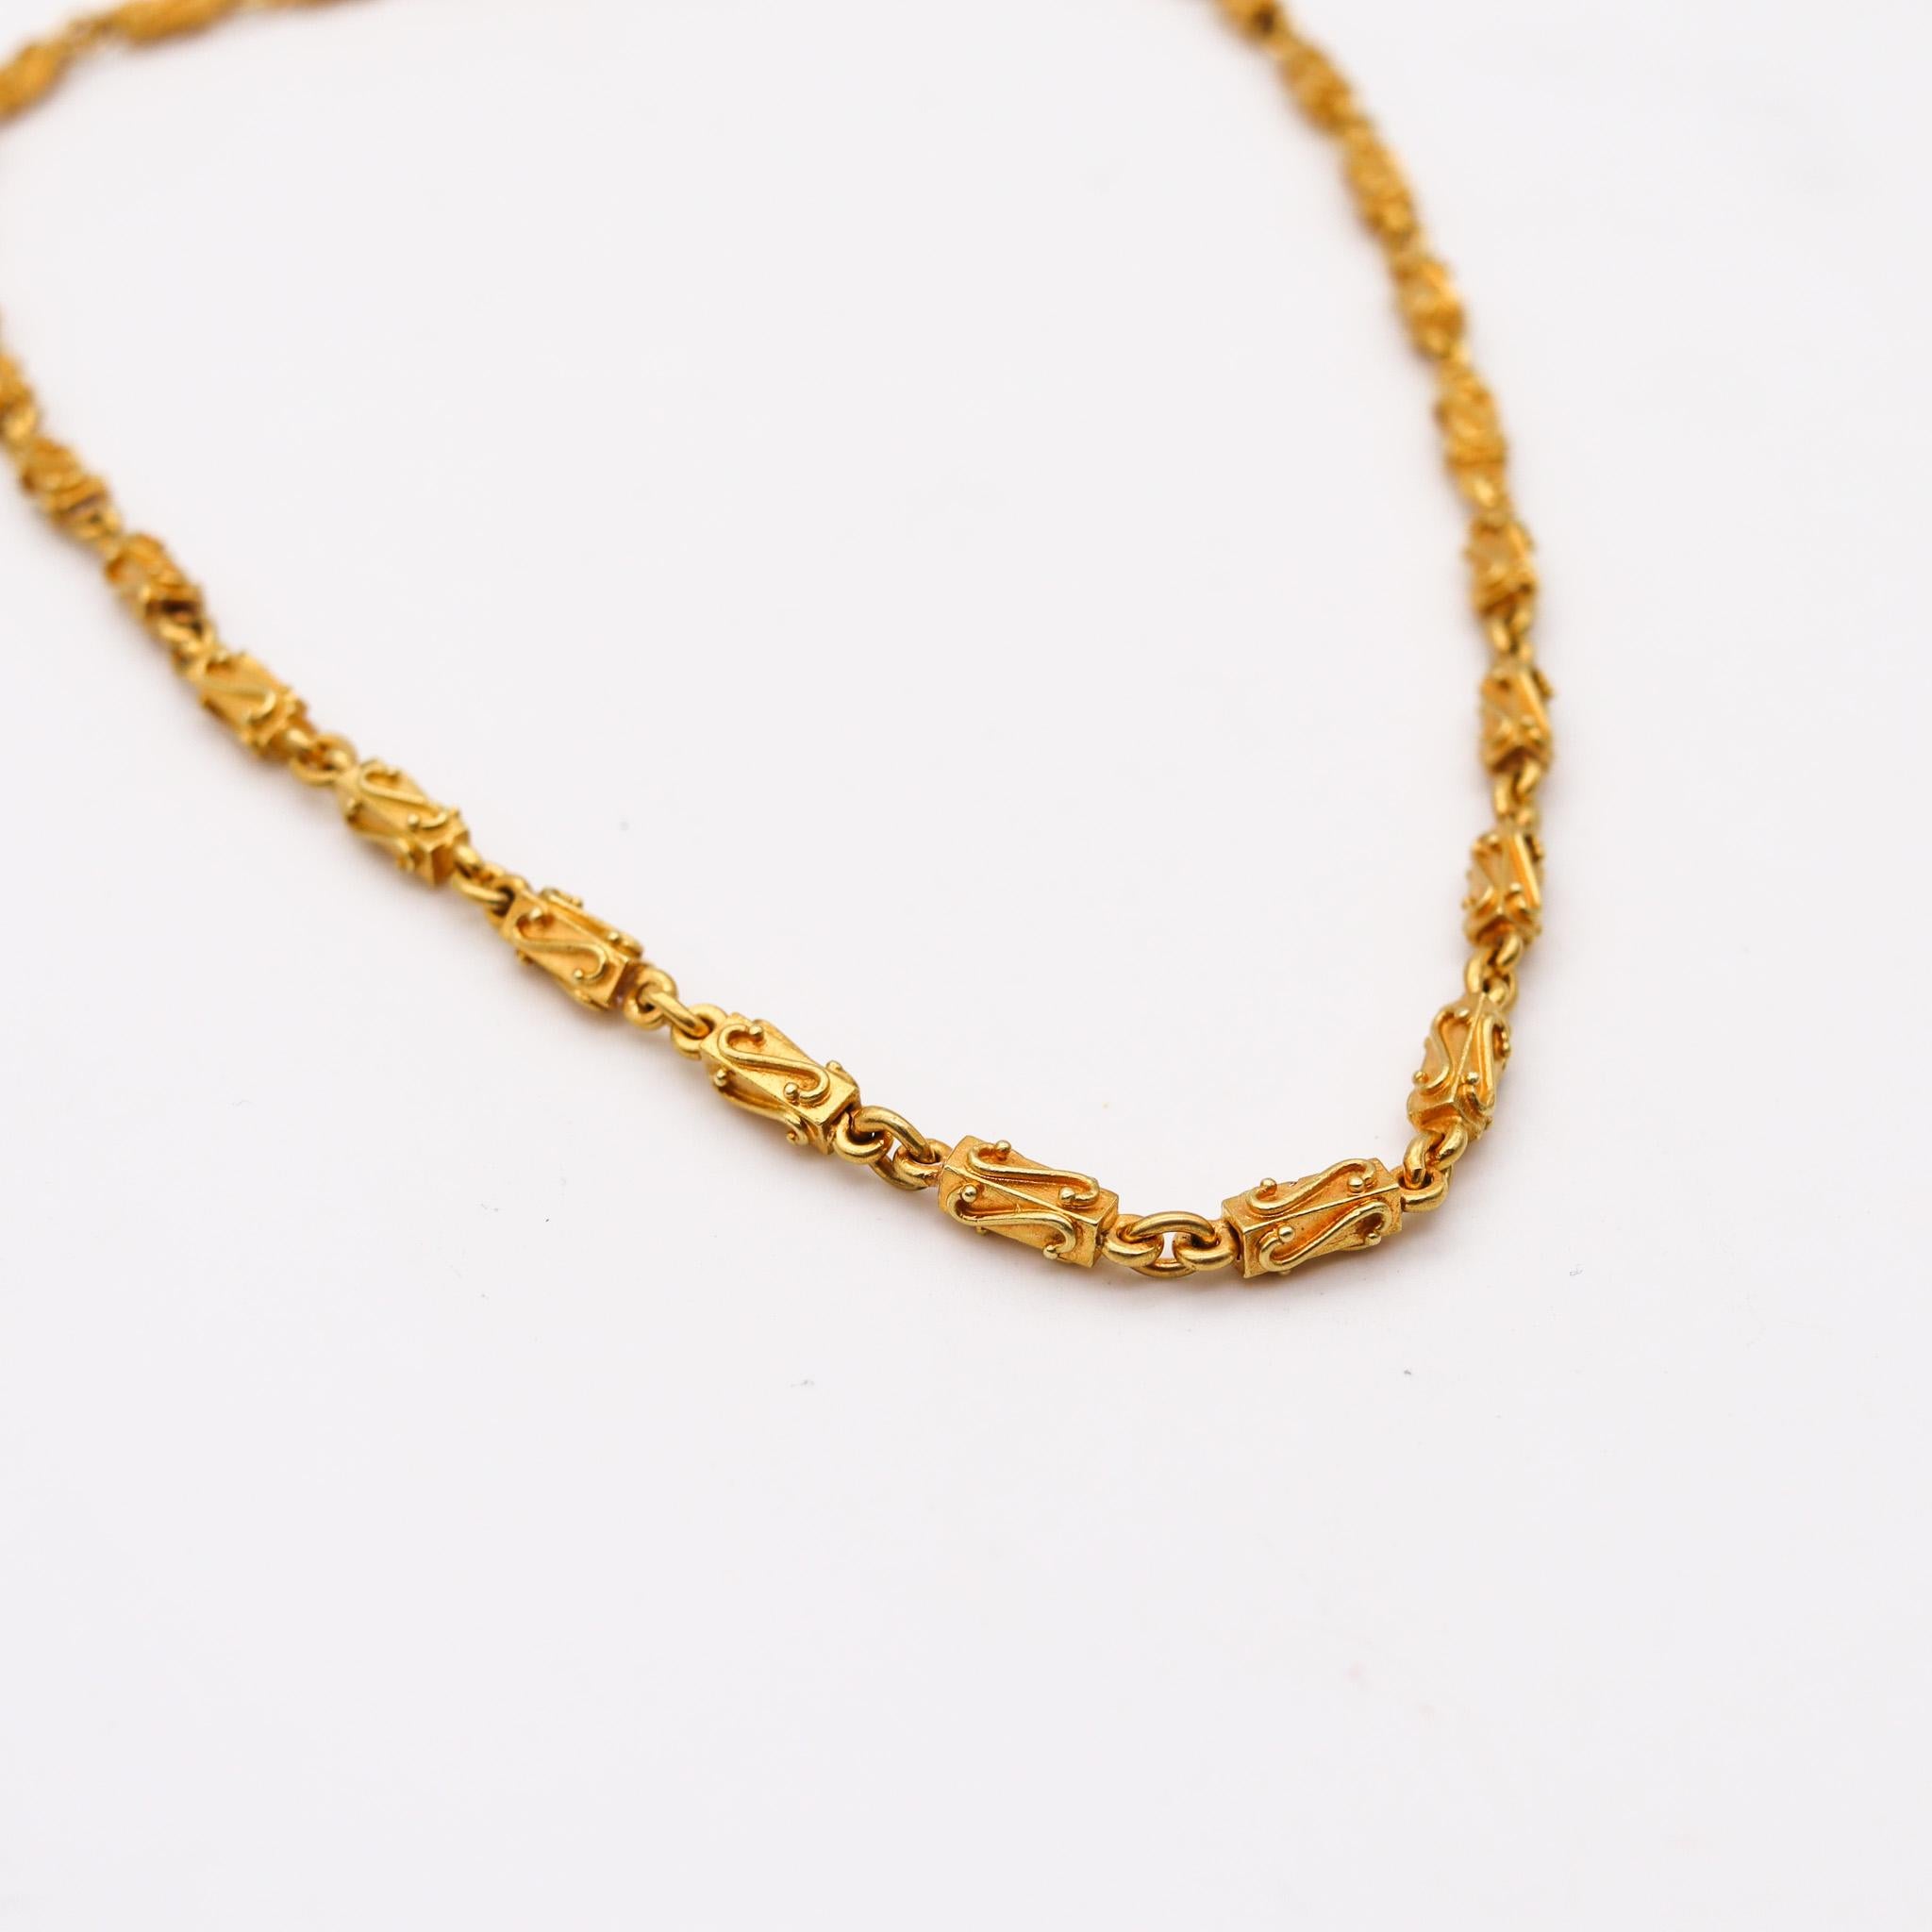 An Etruscan revival Italian chain.

Beautiful intricate chain necklace, created in Italy with Etruscan revival patterns. Crafted in solid yellow gold of 18 karats with brushed finish. Composed by 28 elaborated rectangular links decorated with with